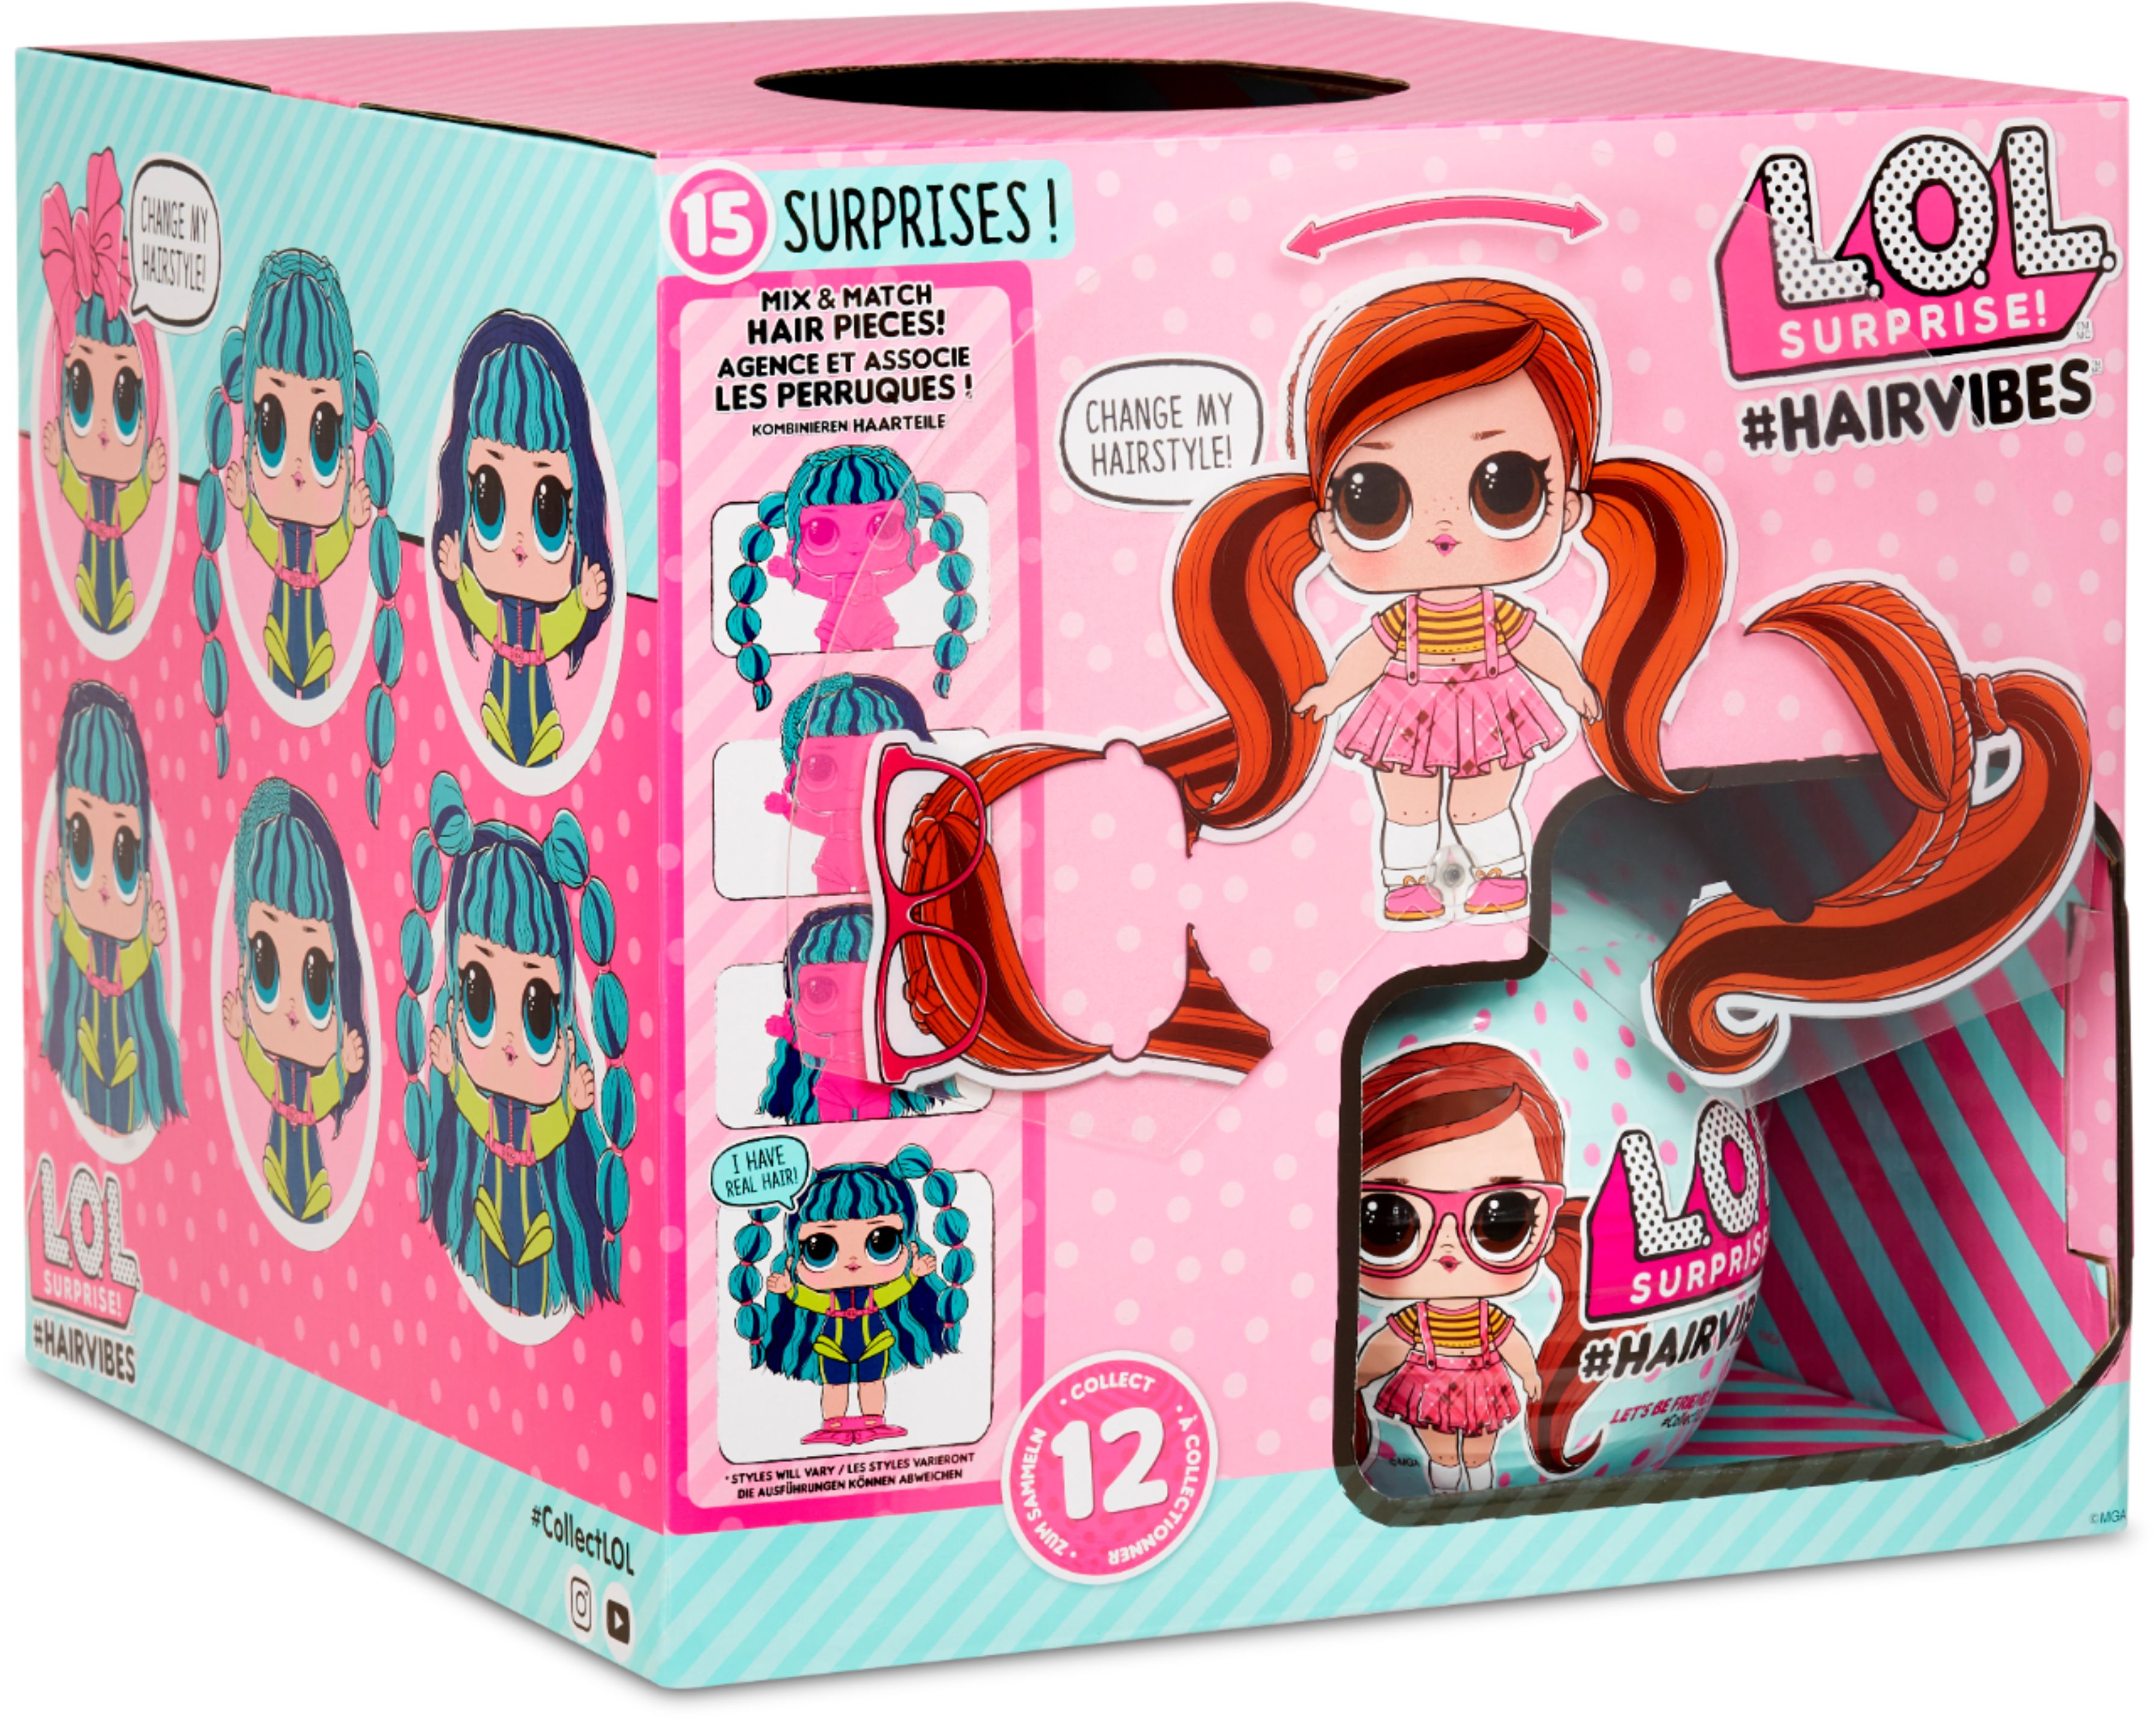 #Hairvibes Dolls with 15 Surprises & Mix & Match Hairpieces Surprise L.O.L